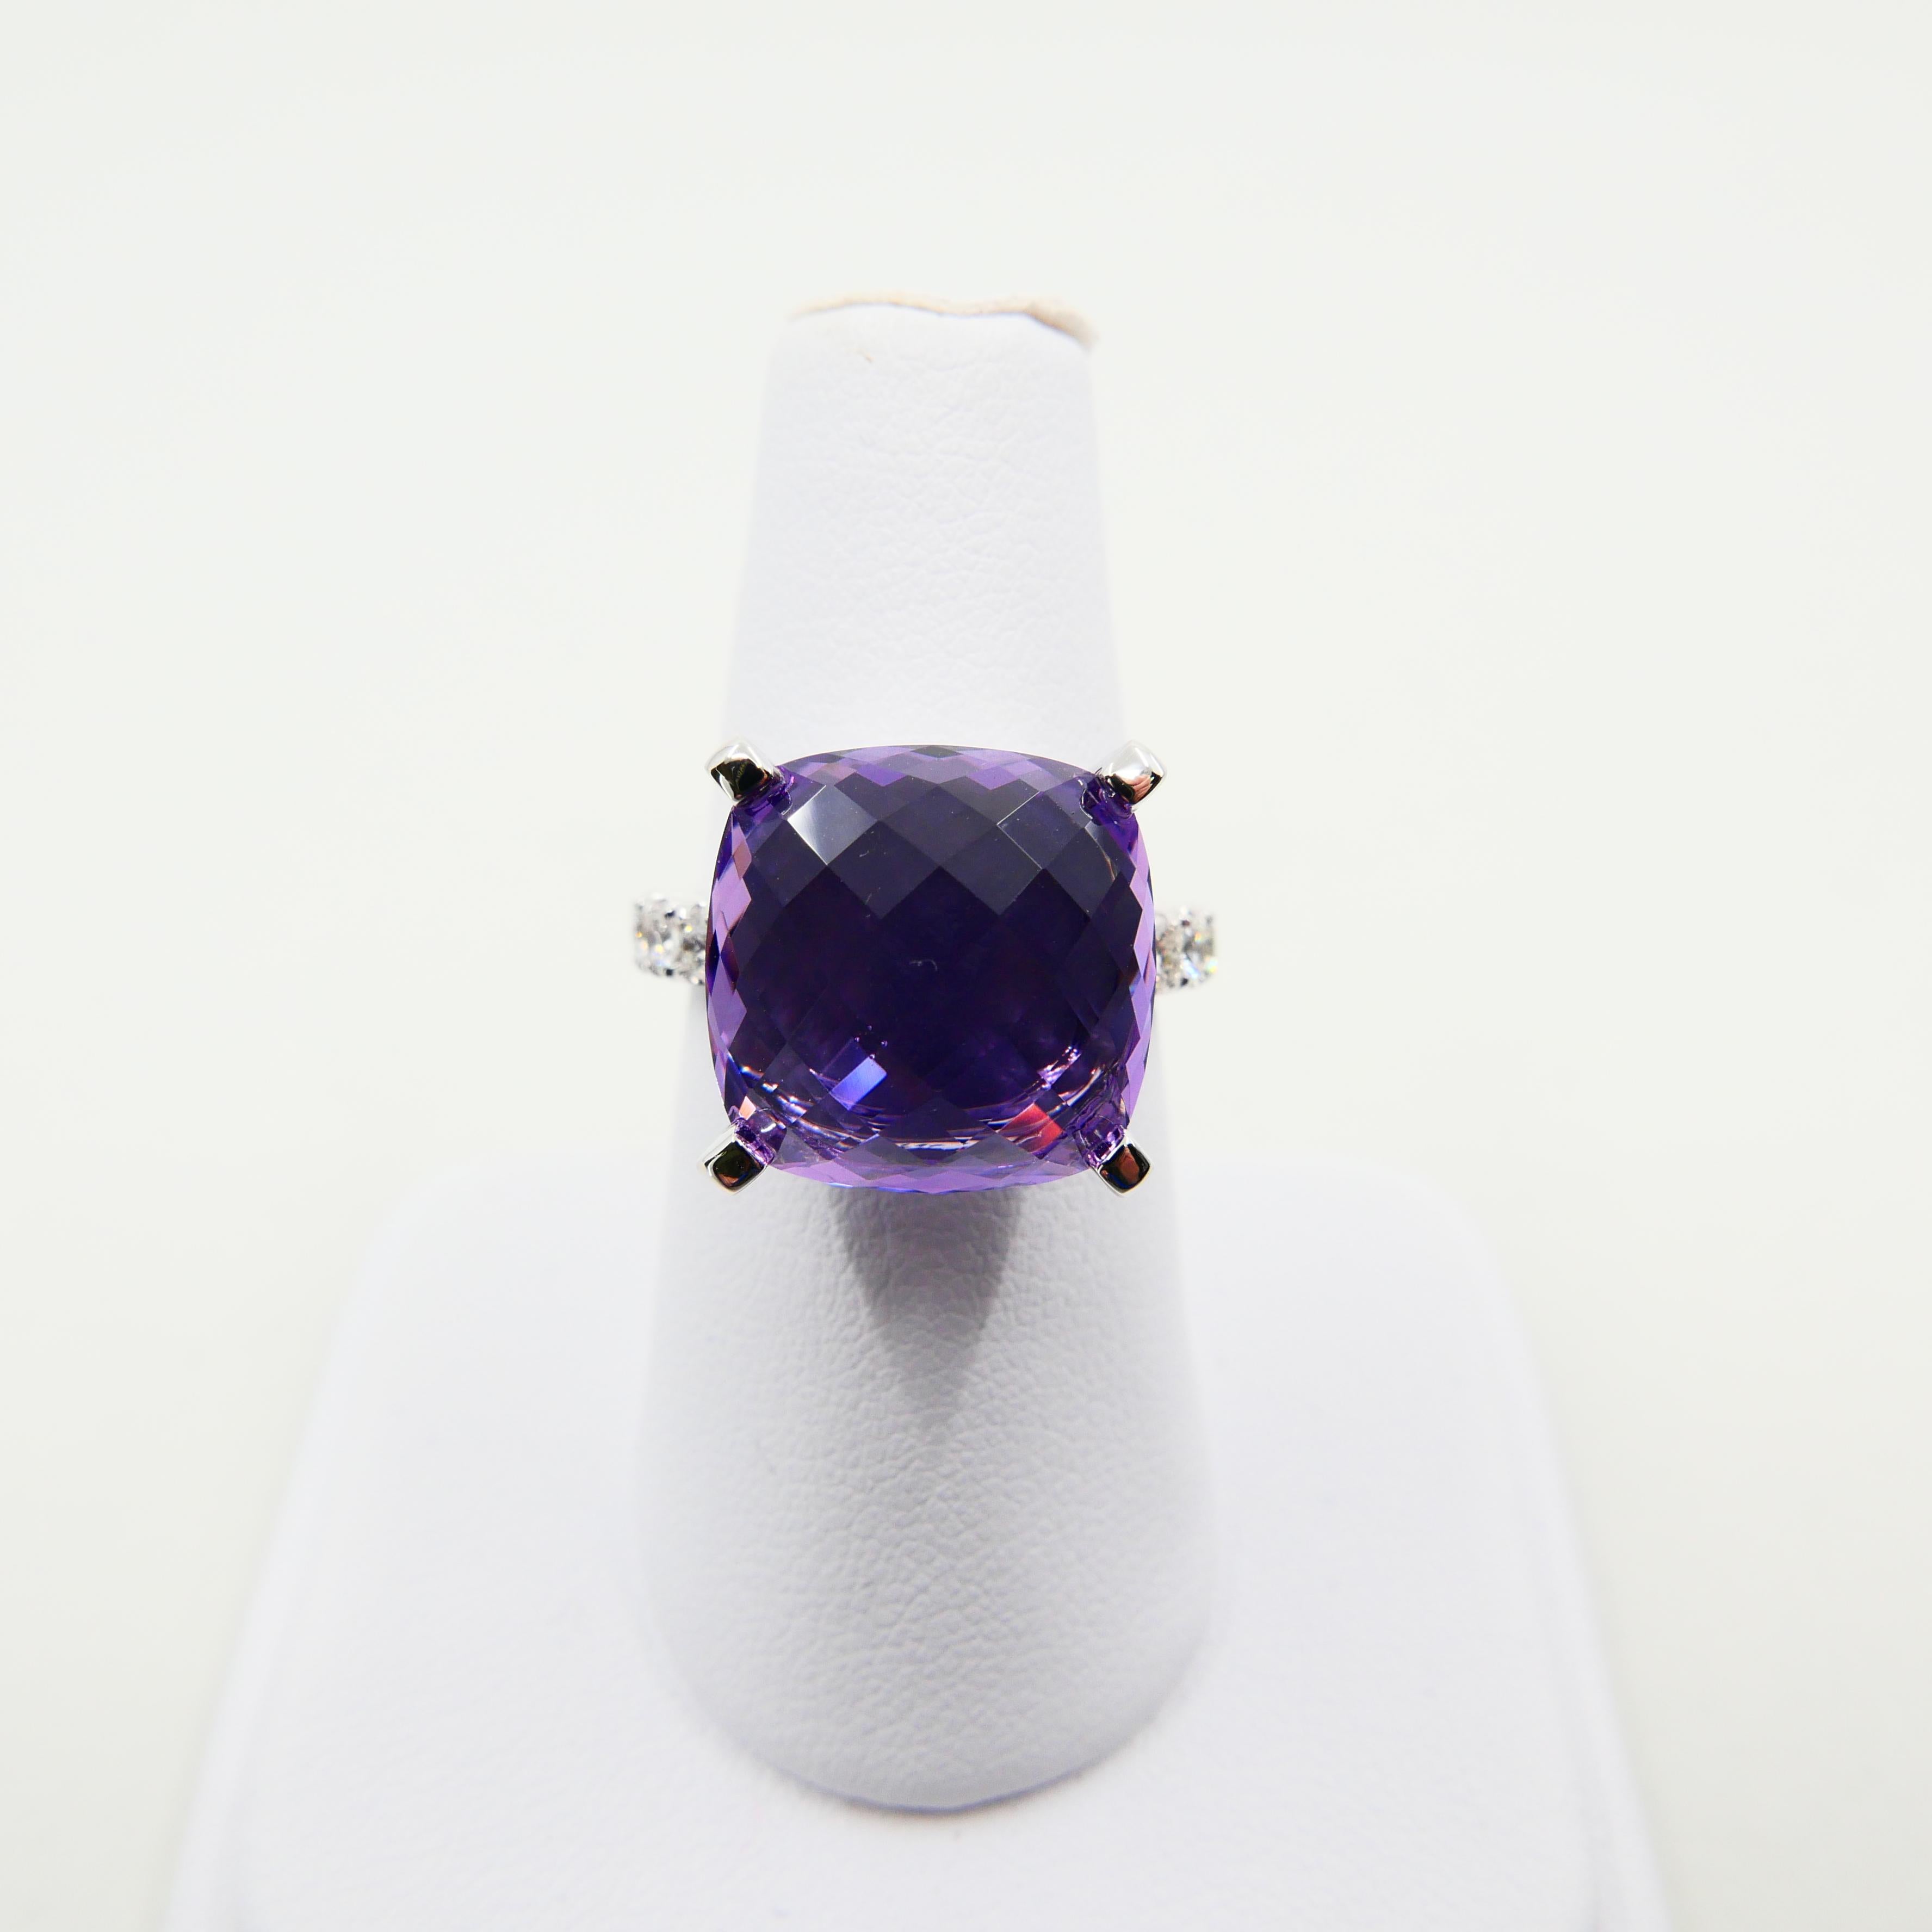 8.67 Carat Faceted Amethyst and Diamond Cocktail Ring, 18 Karat White Gold For Sale 8